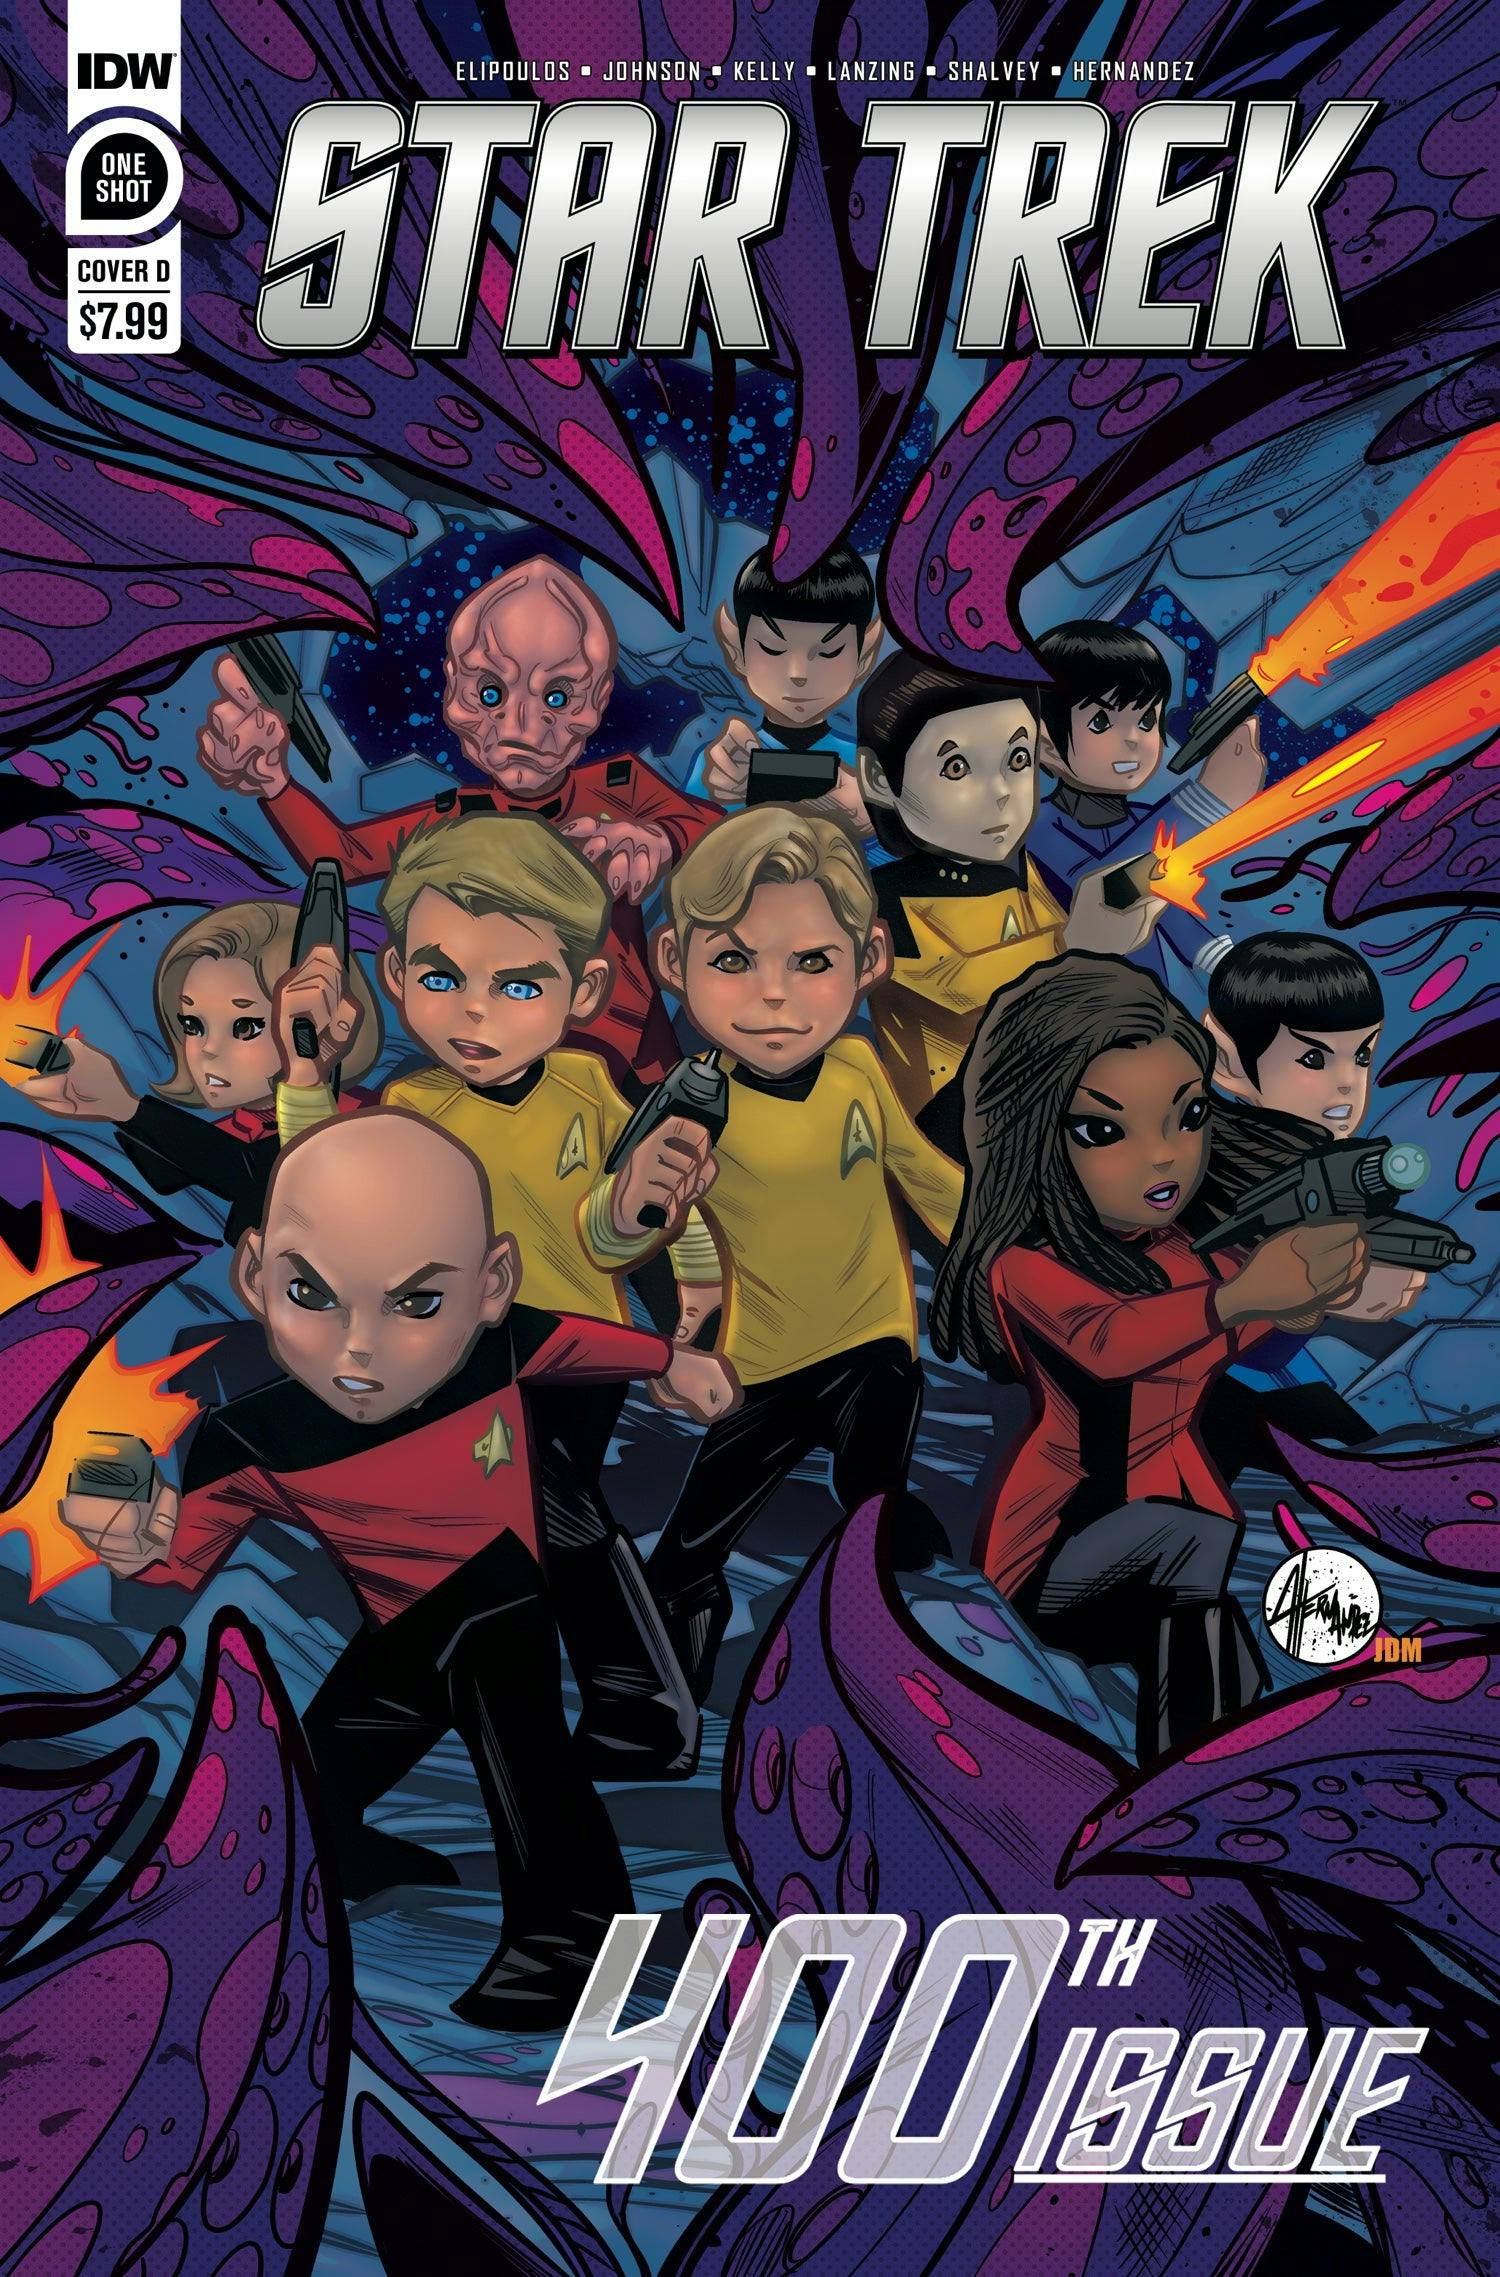 The Star Trek #400 D Cover, featuring adorable chibi versions of major characters including Kirk, Picard, and Burnham.